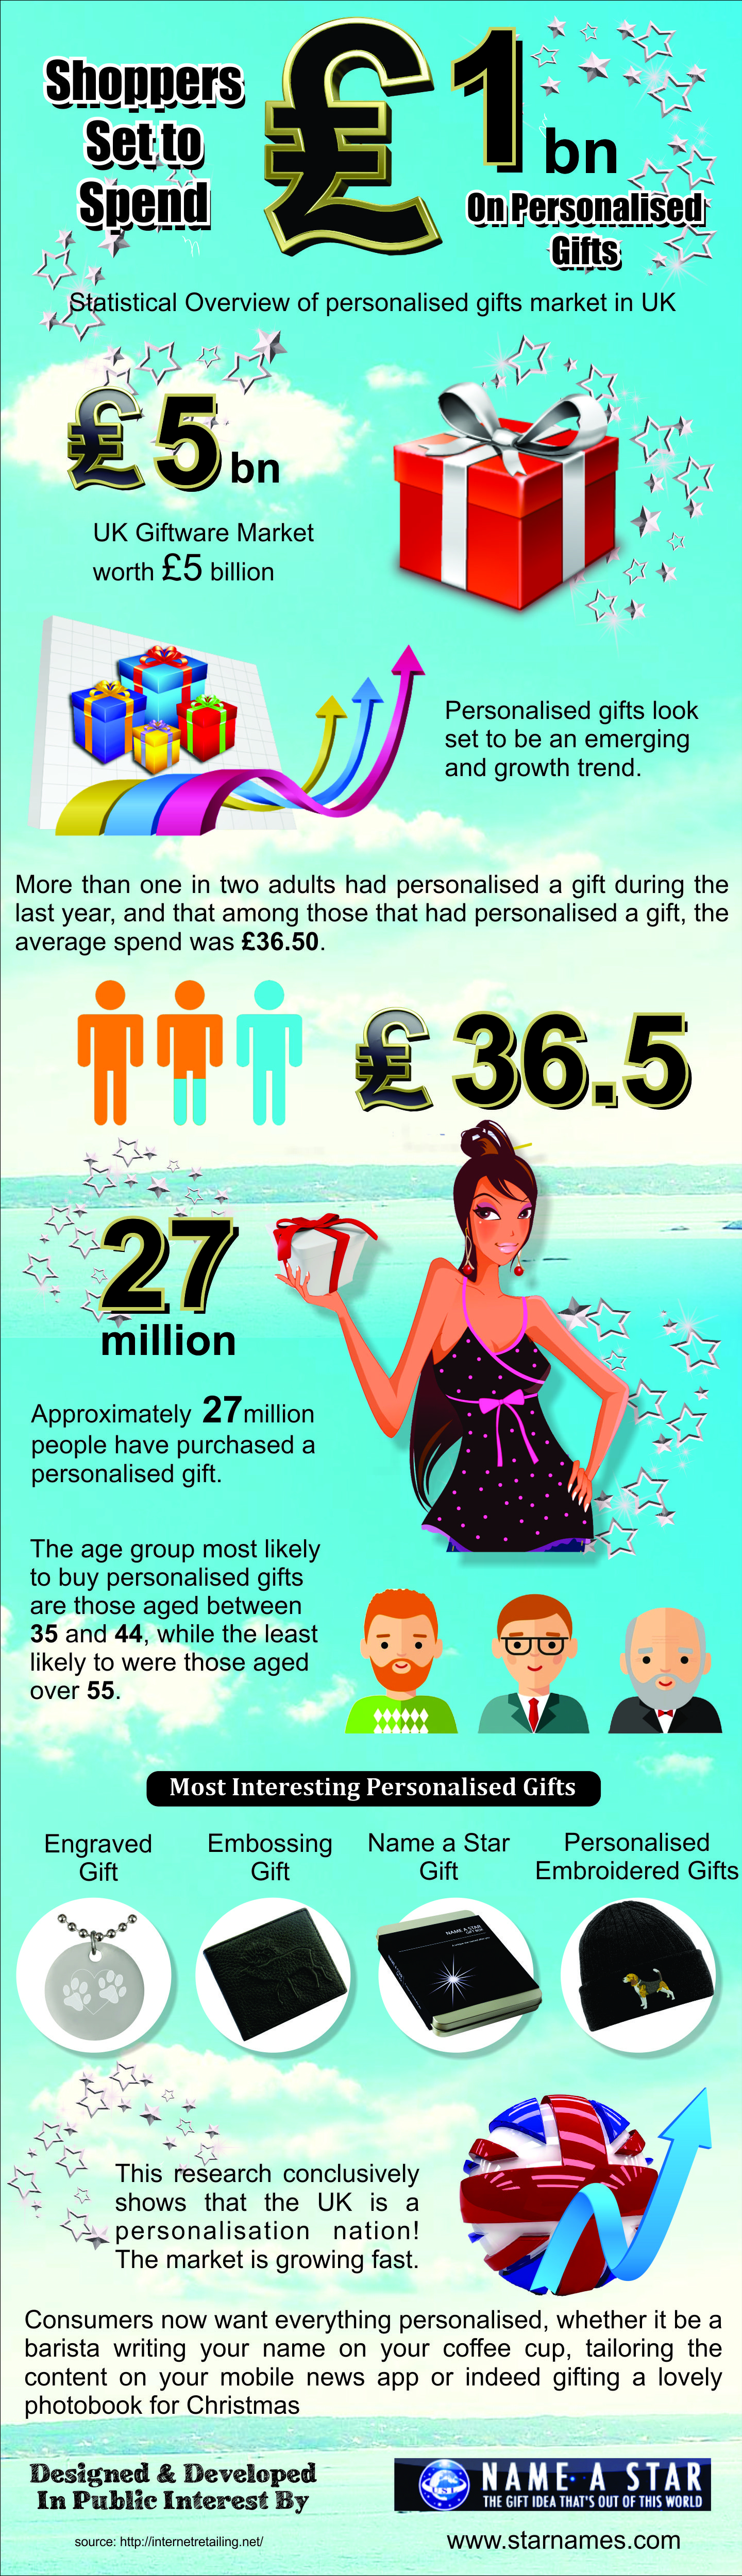 Recent Trend in the Emerging Personalised Gift Market in UK